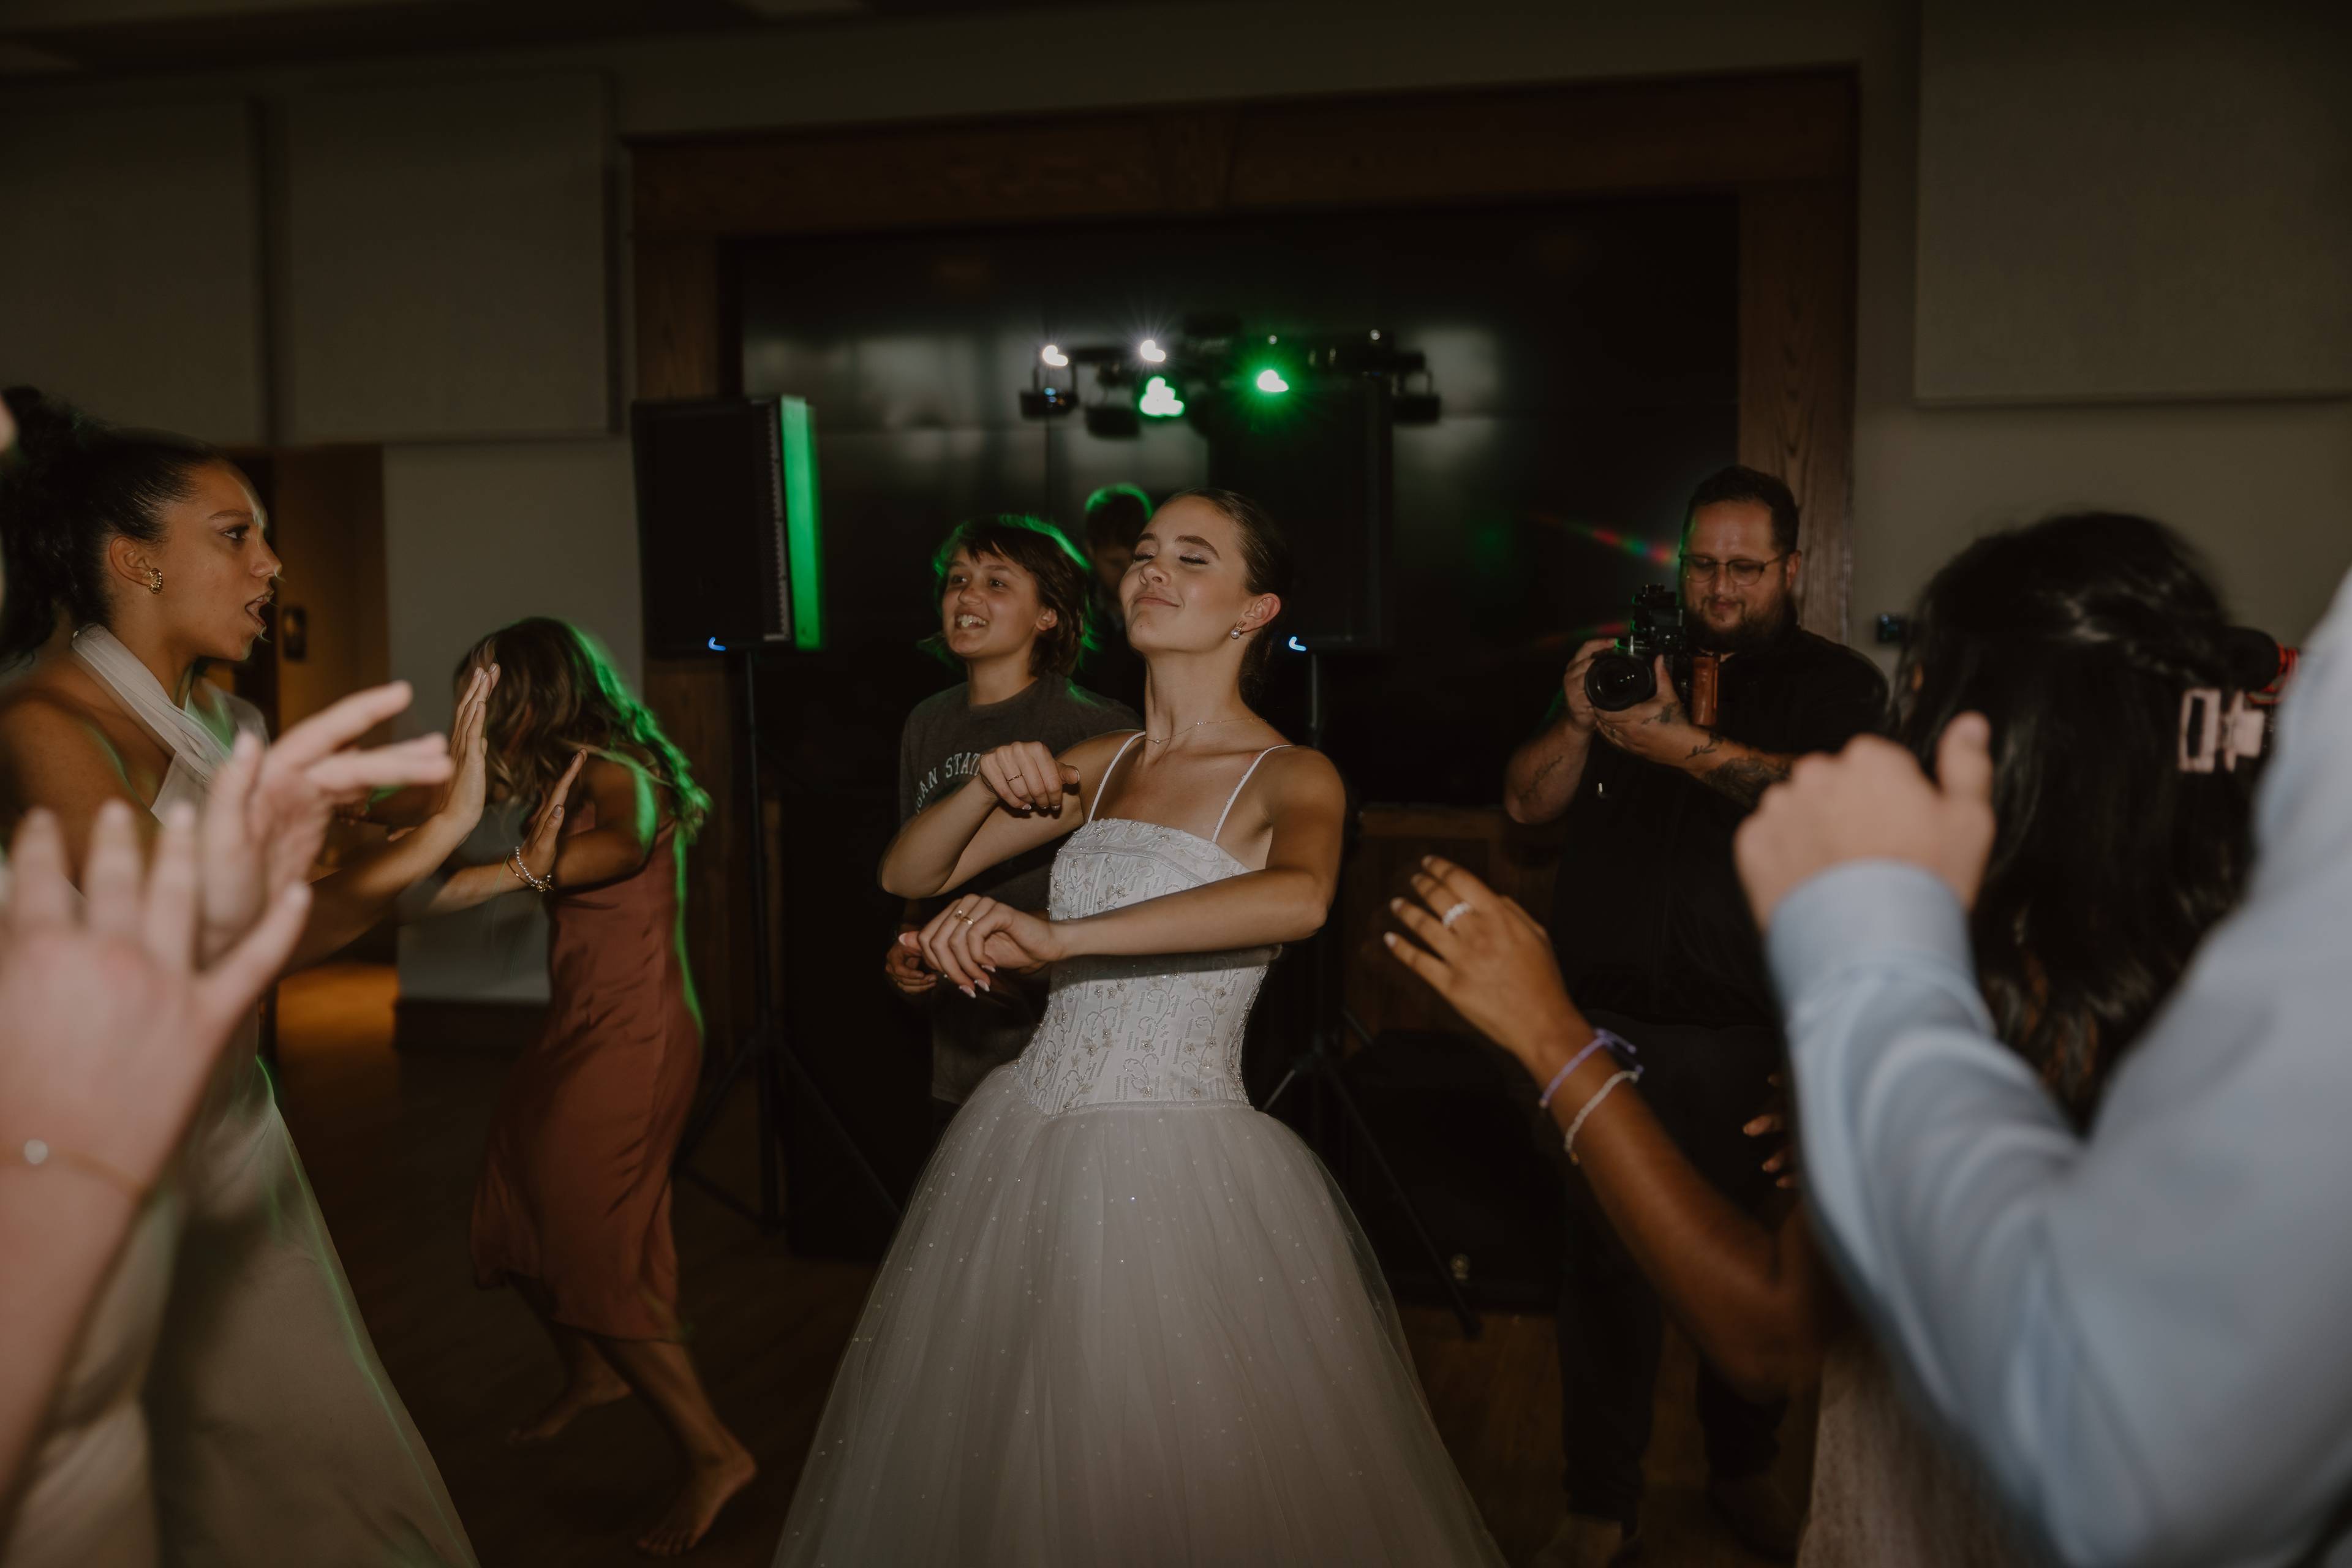 A bride happily grooving to the music.